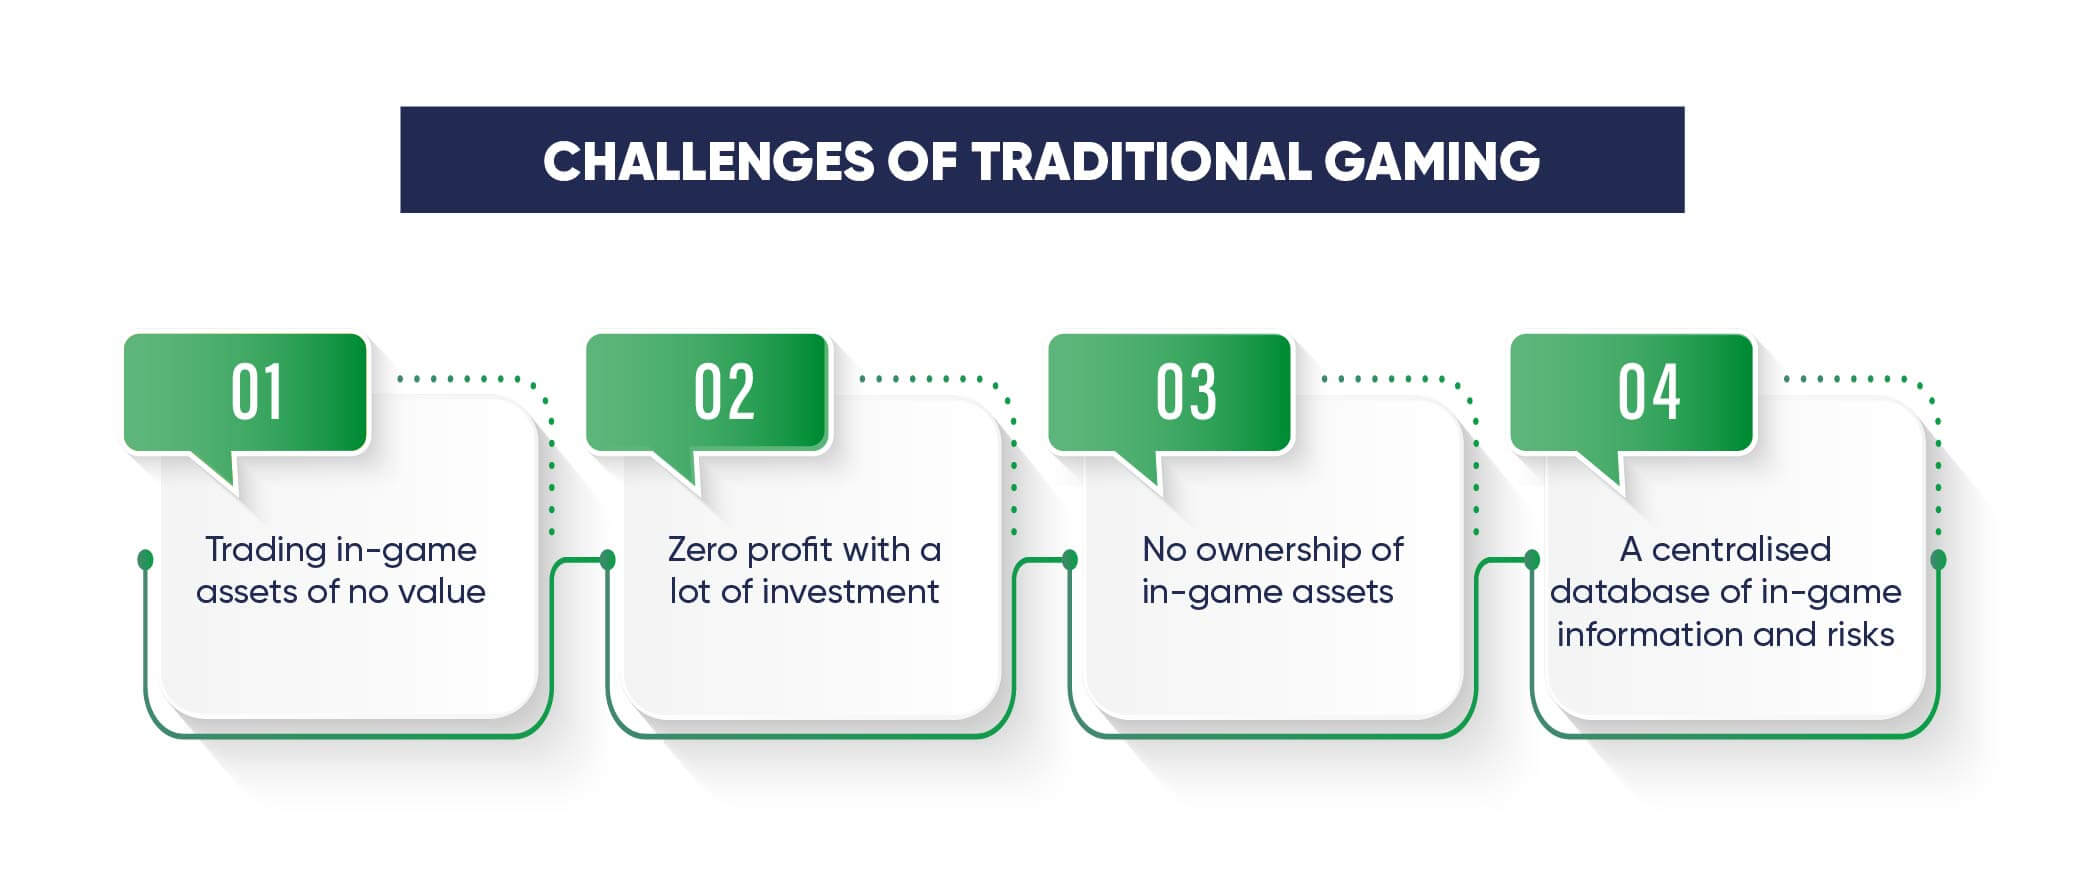 Challenges of traditional gaming